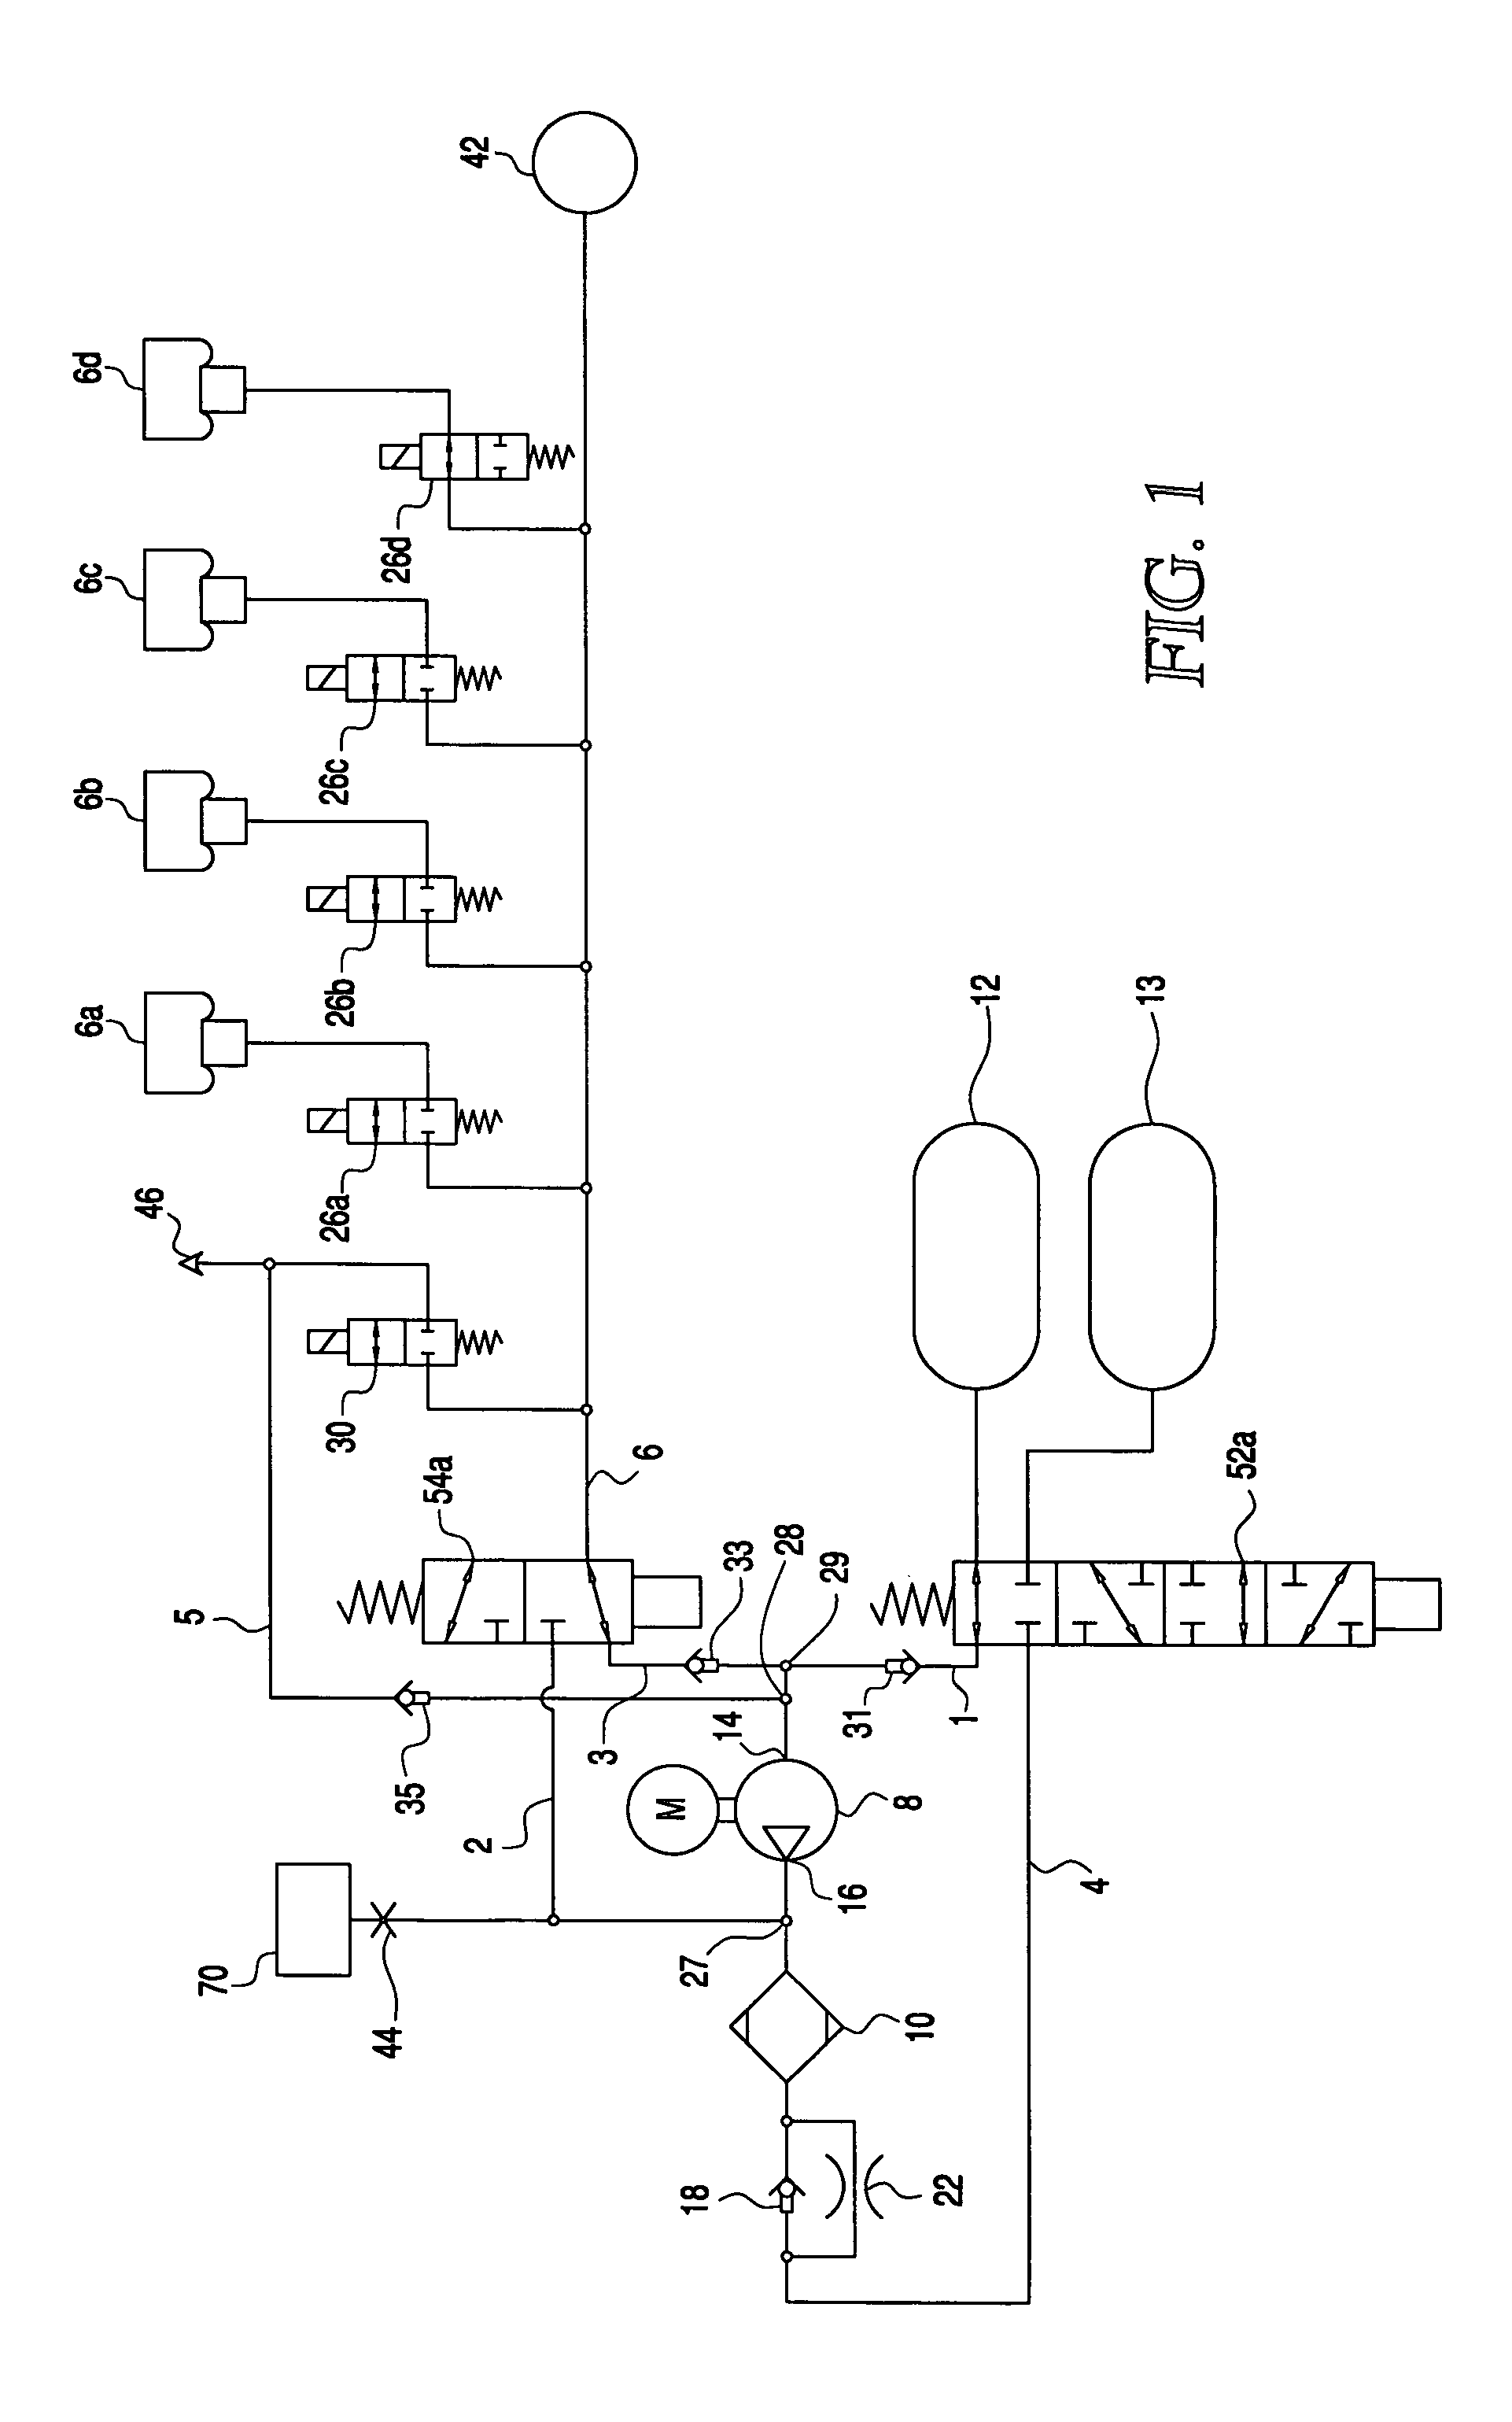 Closed level control system for a vehicle with the system having two pressure stores